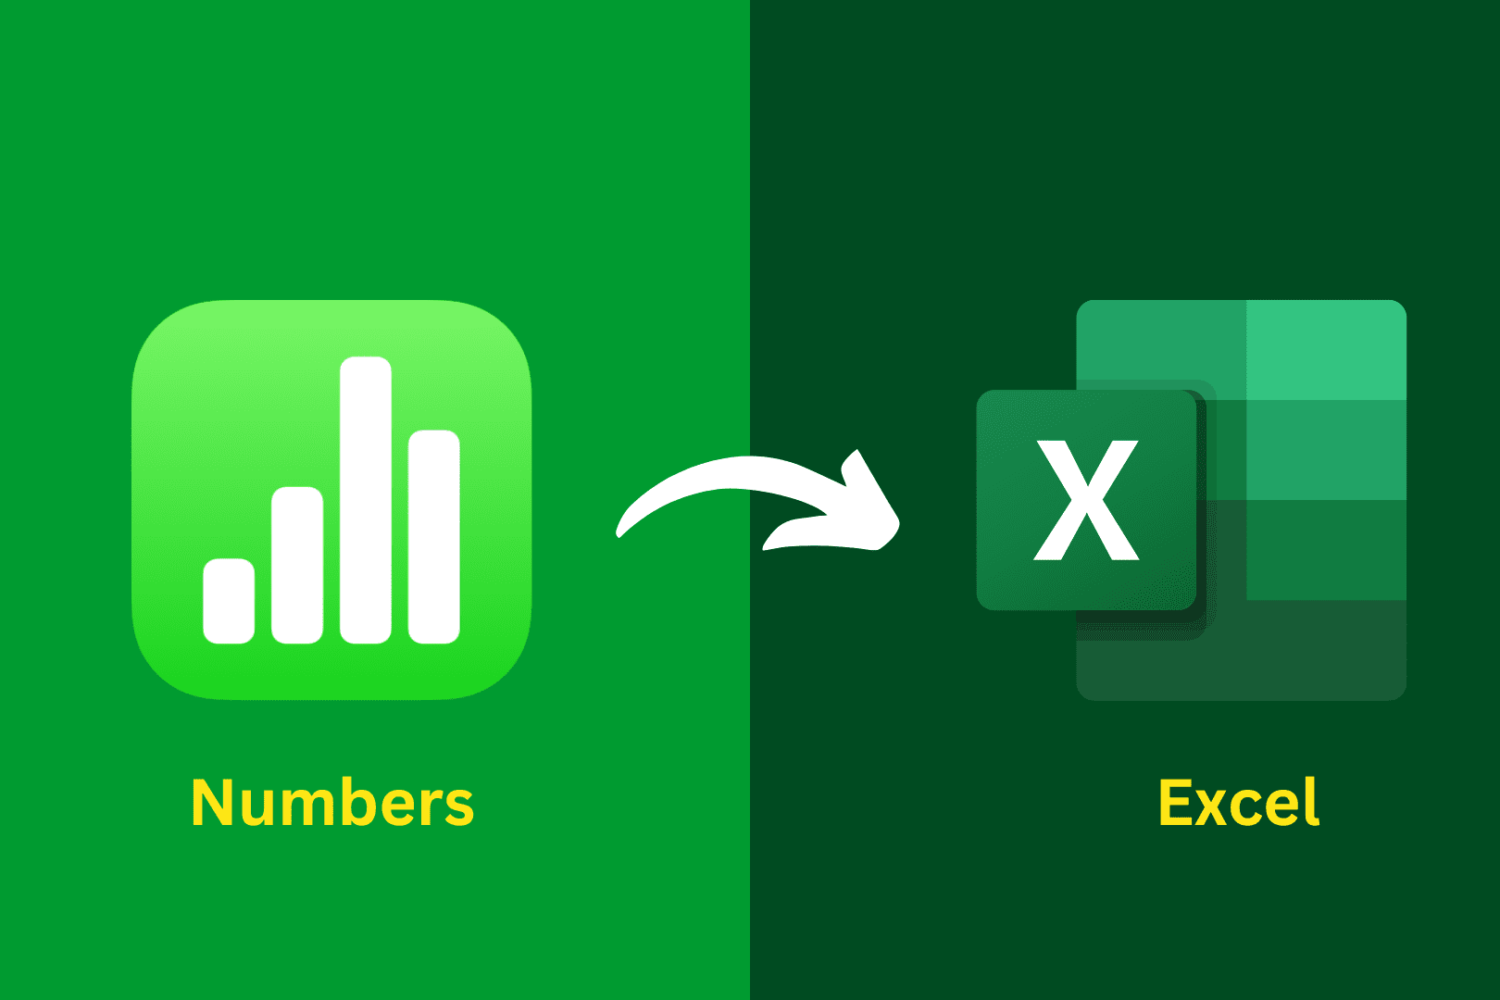 Convert Numbers to Excel